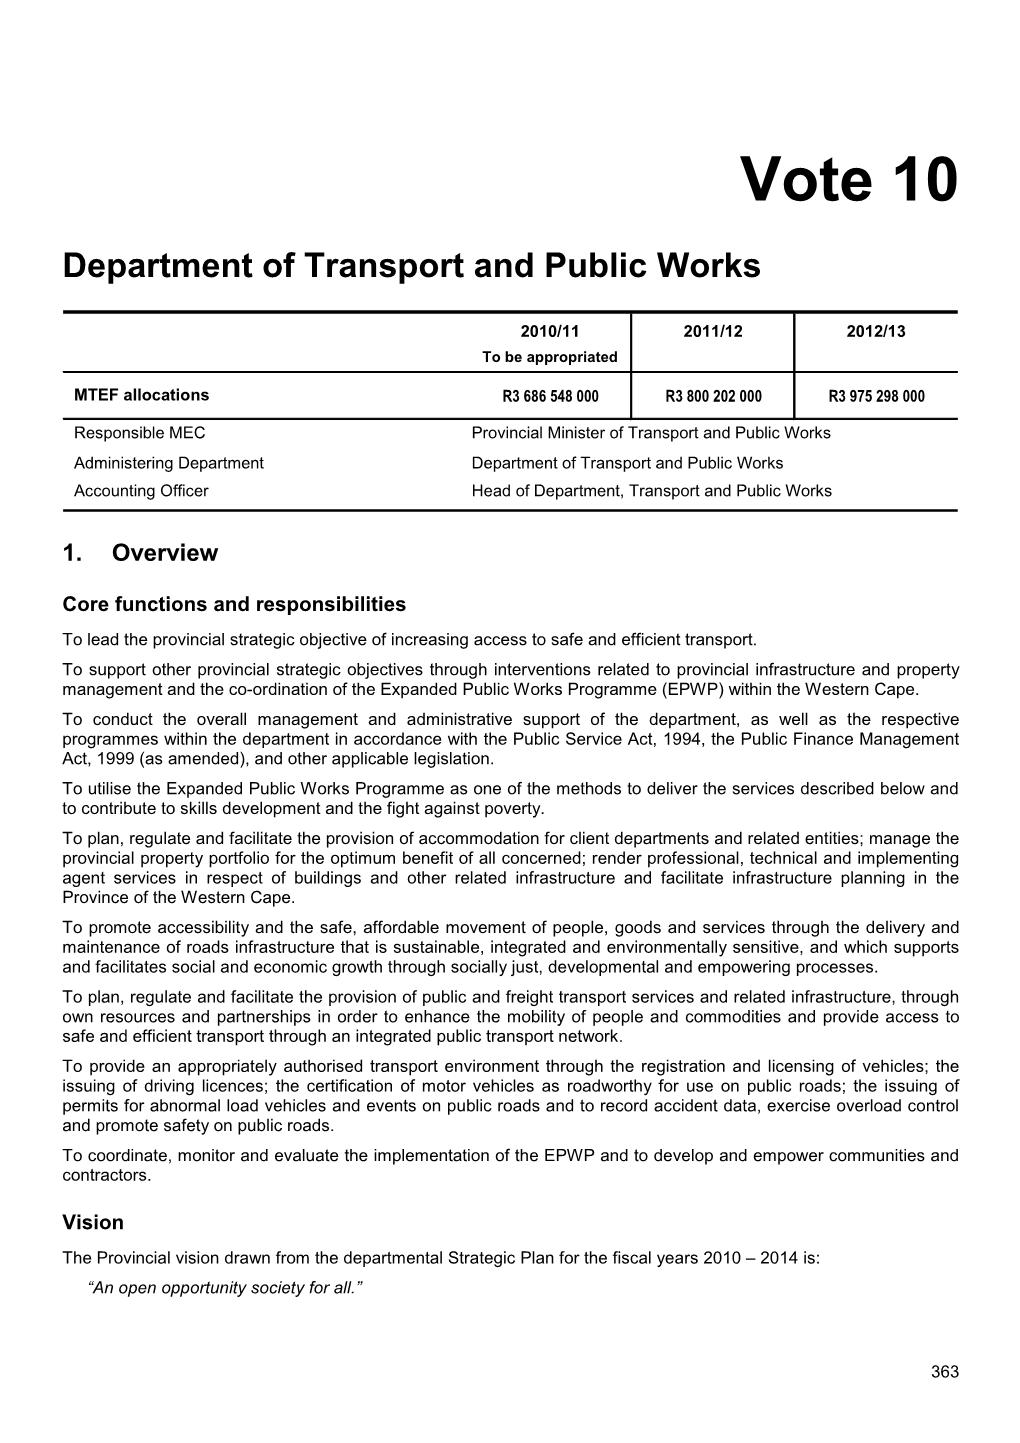 Vote 10 : Transport and Public Works